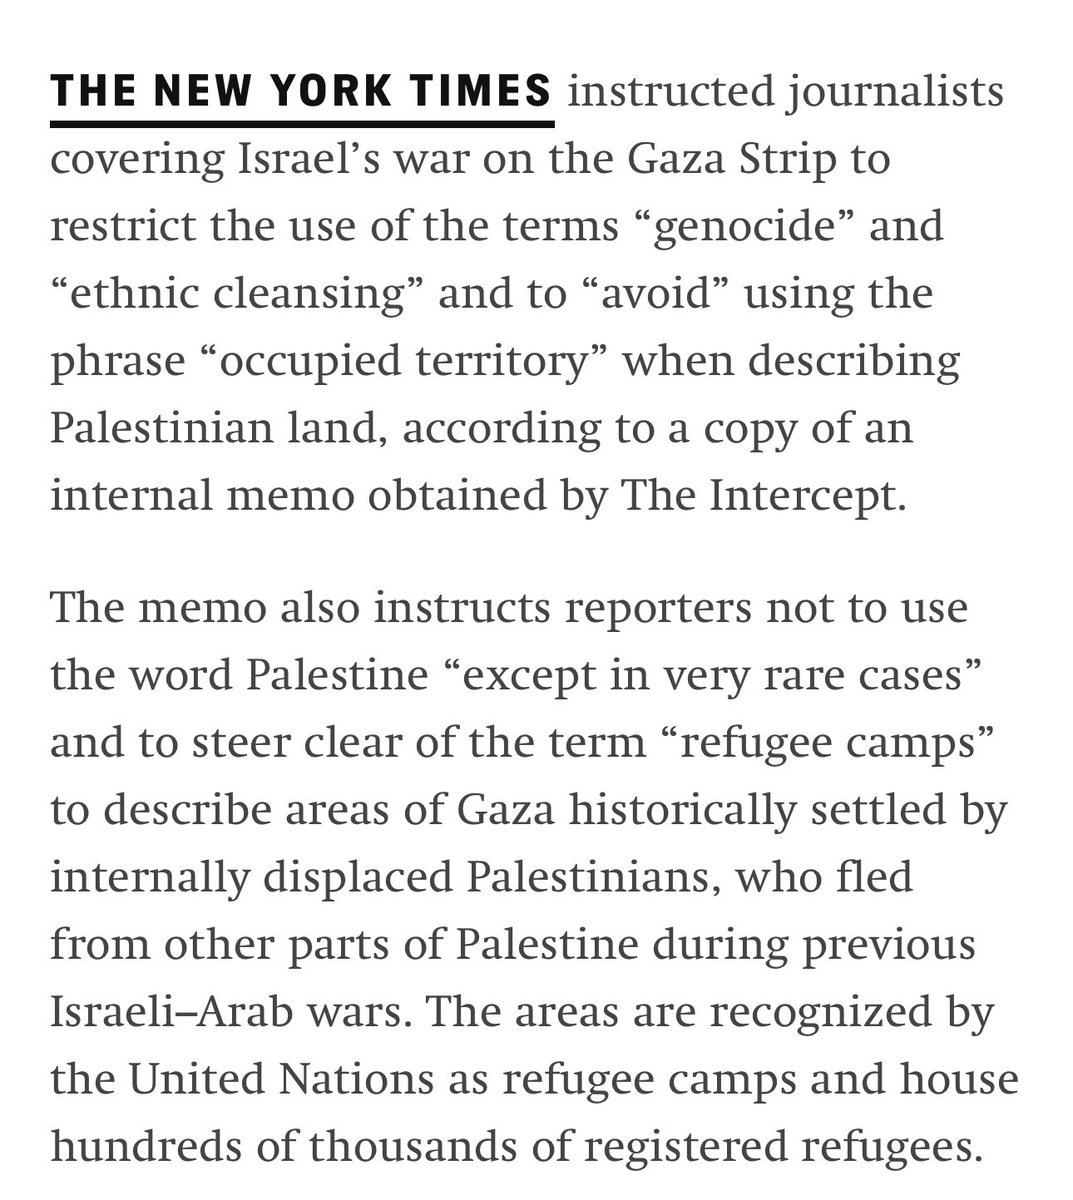 ‘The memo also instructs reporters not to use the word Palestine “except in very rare cases”’—This NYT memo was issued in November and has been regularly updated since. It shows that despite all the criticism, they are resolutely anti-Palestinian and committed to this genocide.